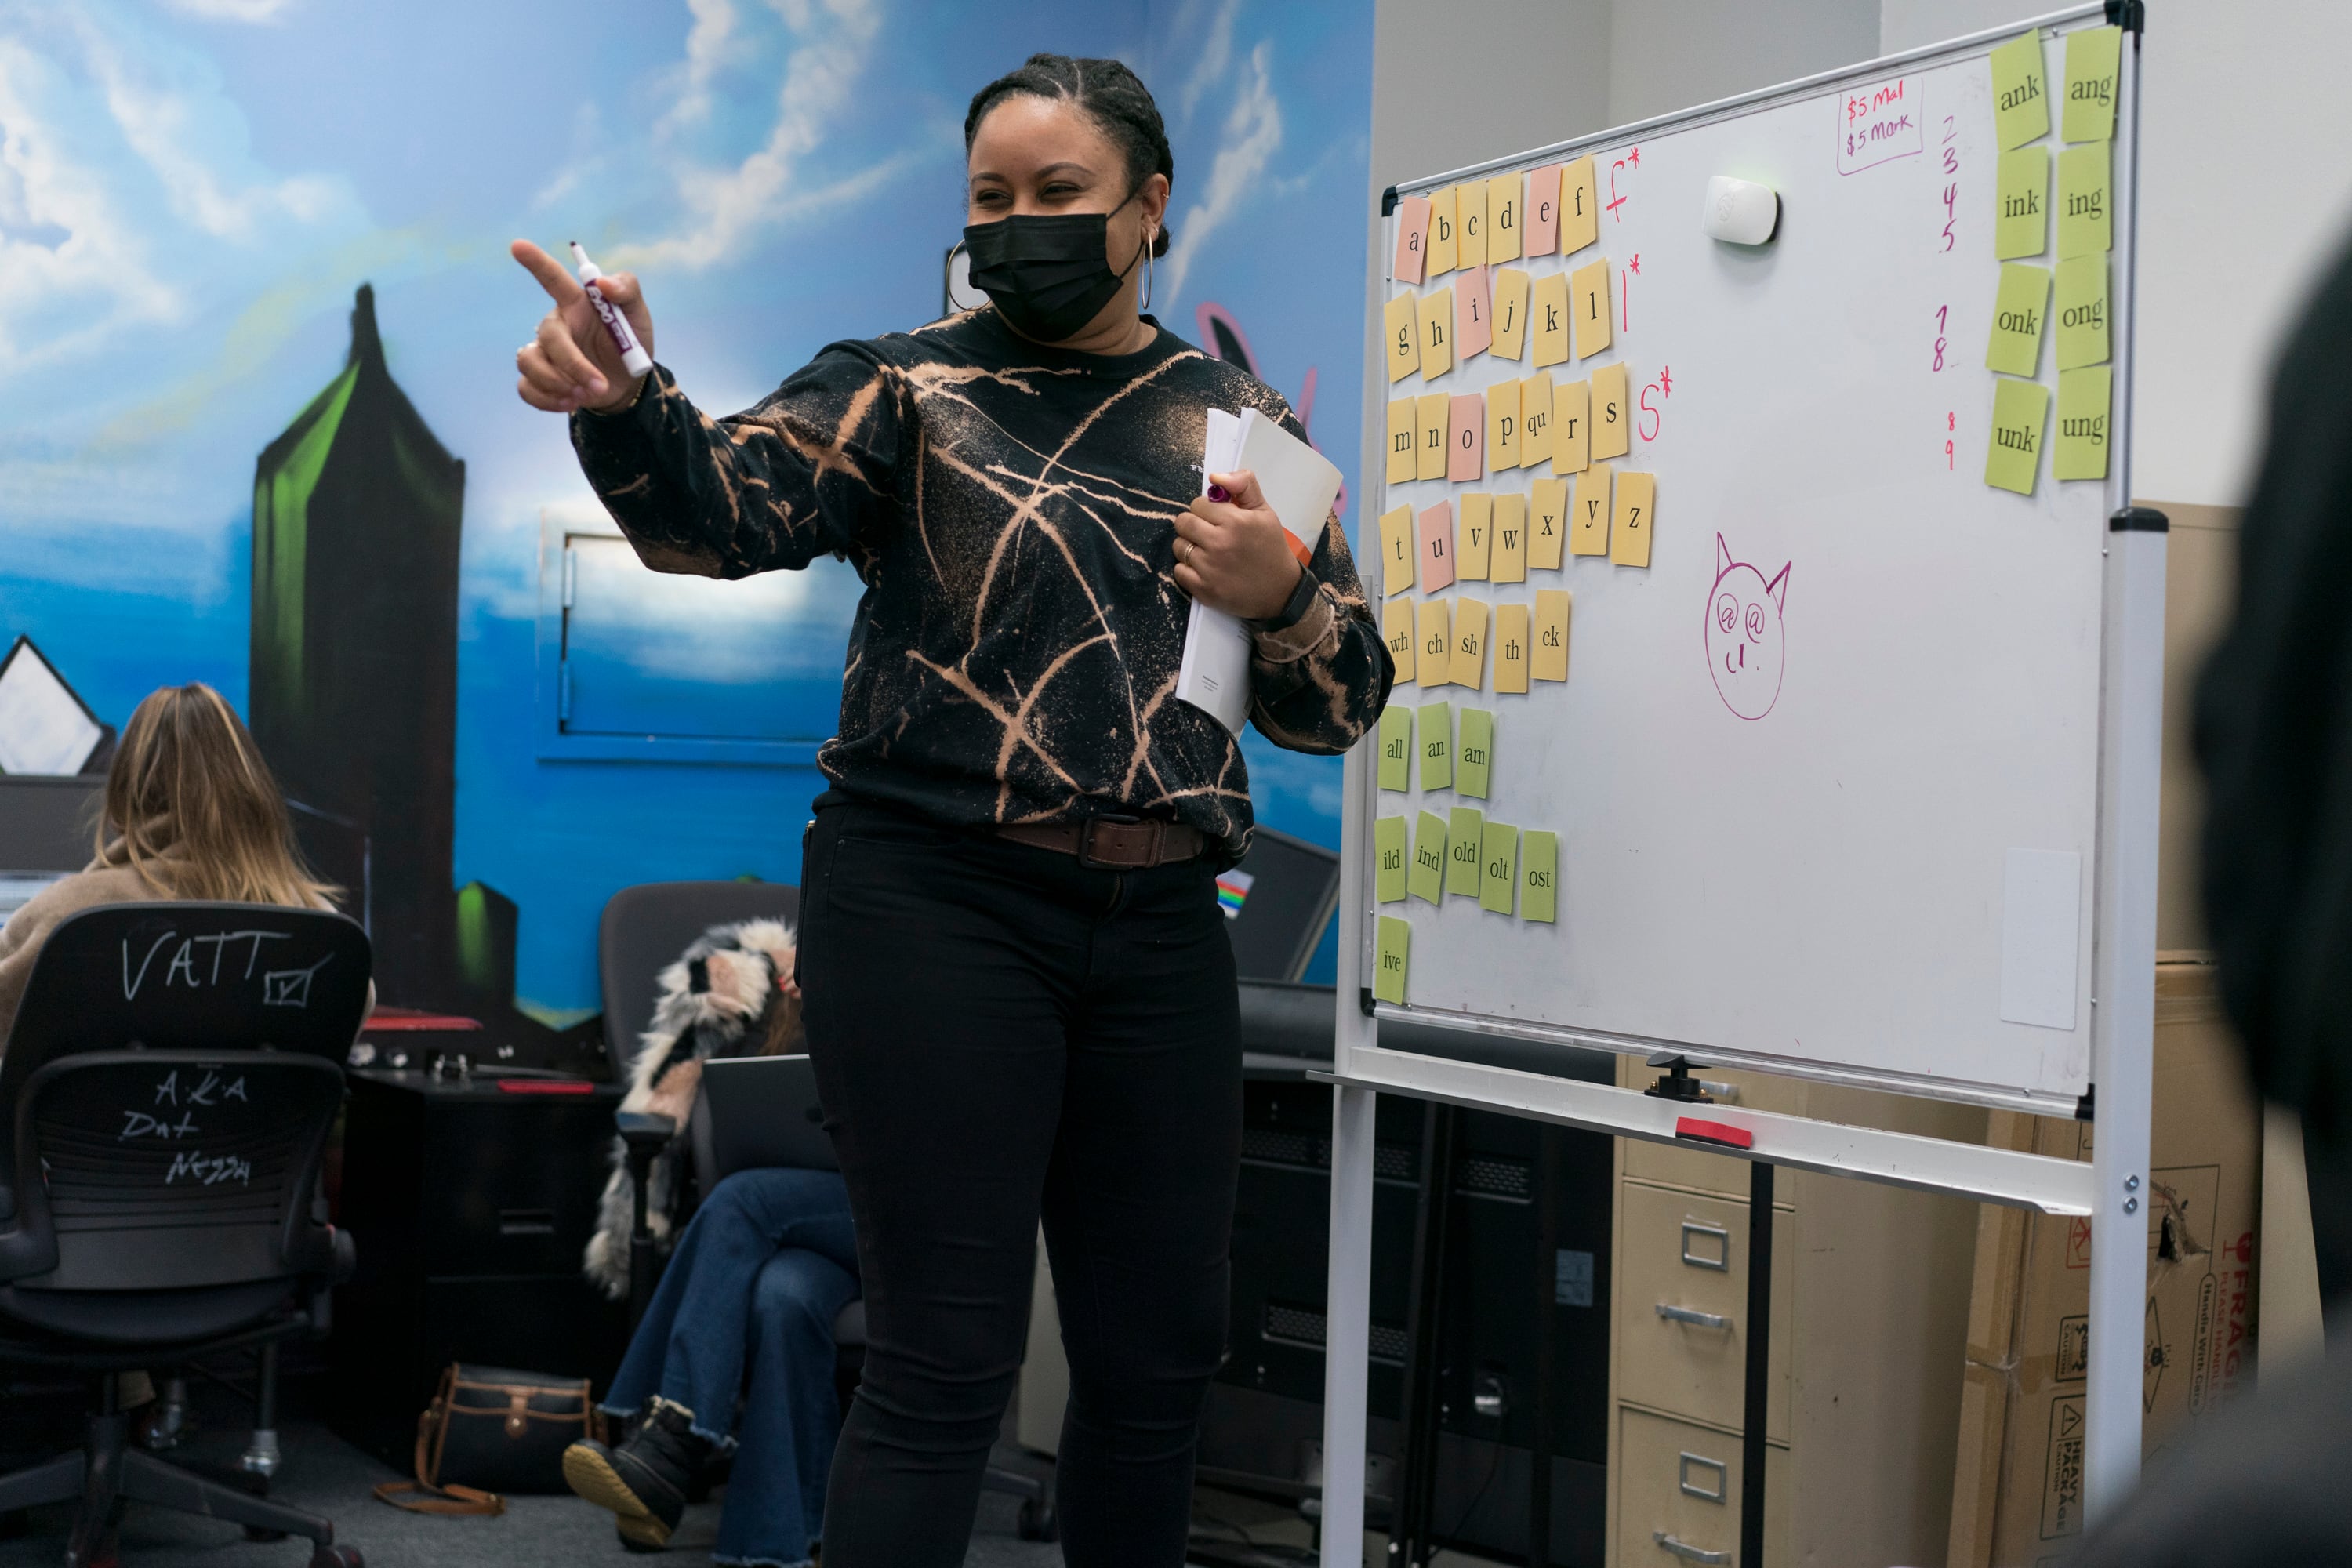 A teacher, wearing a black mask with a black and tan sweater, points elatedly toward a student during reading instruction.